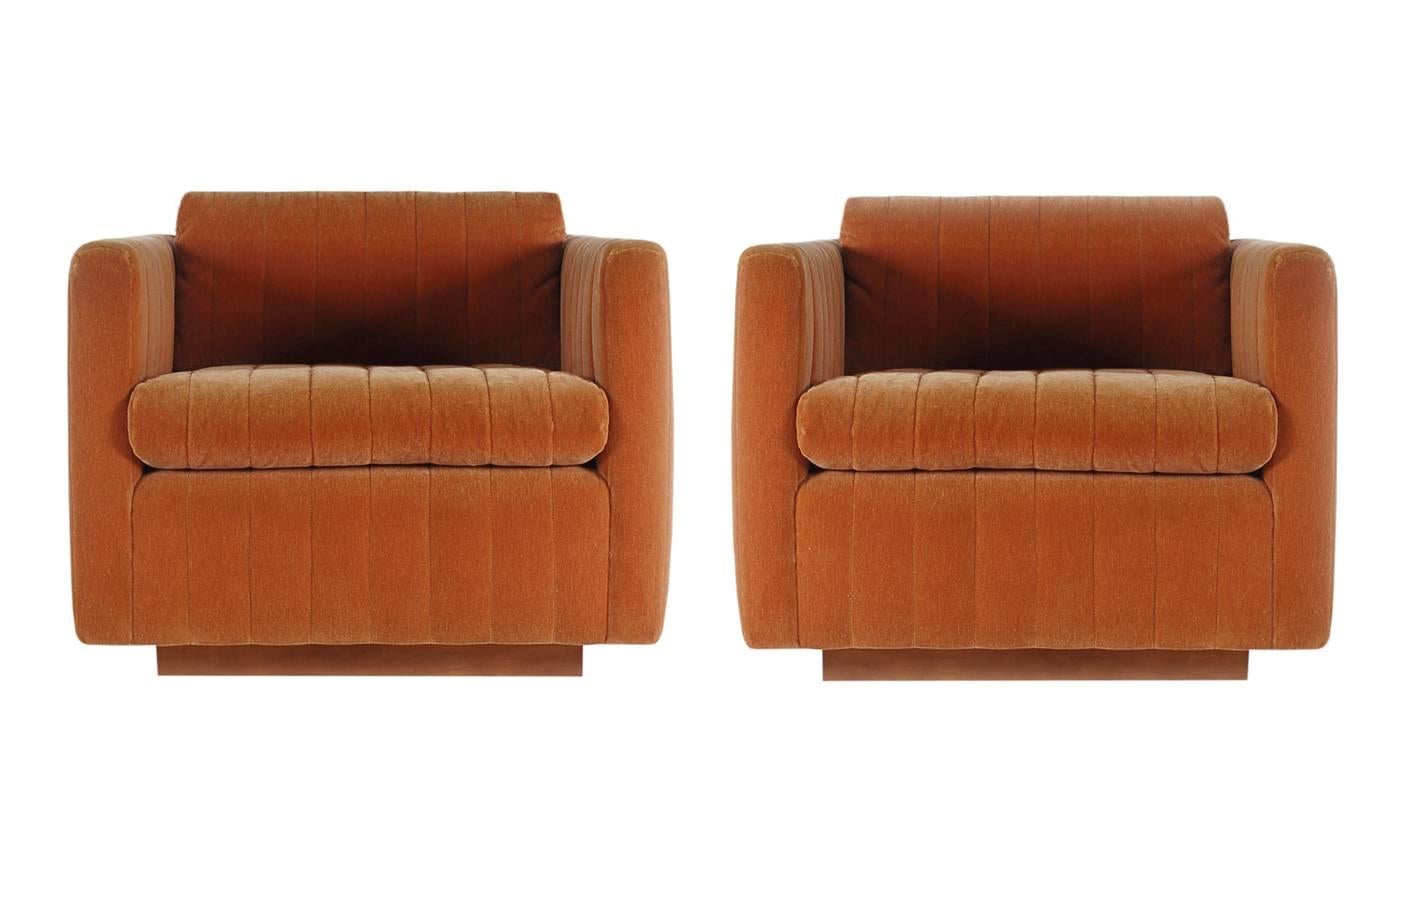 A lovely matching pair of club chairs designed by Milo Baughman for James. These chairs feature Art Deco style ribbed upholstery with walnut plinth bases.